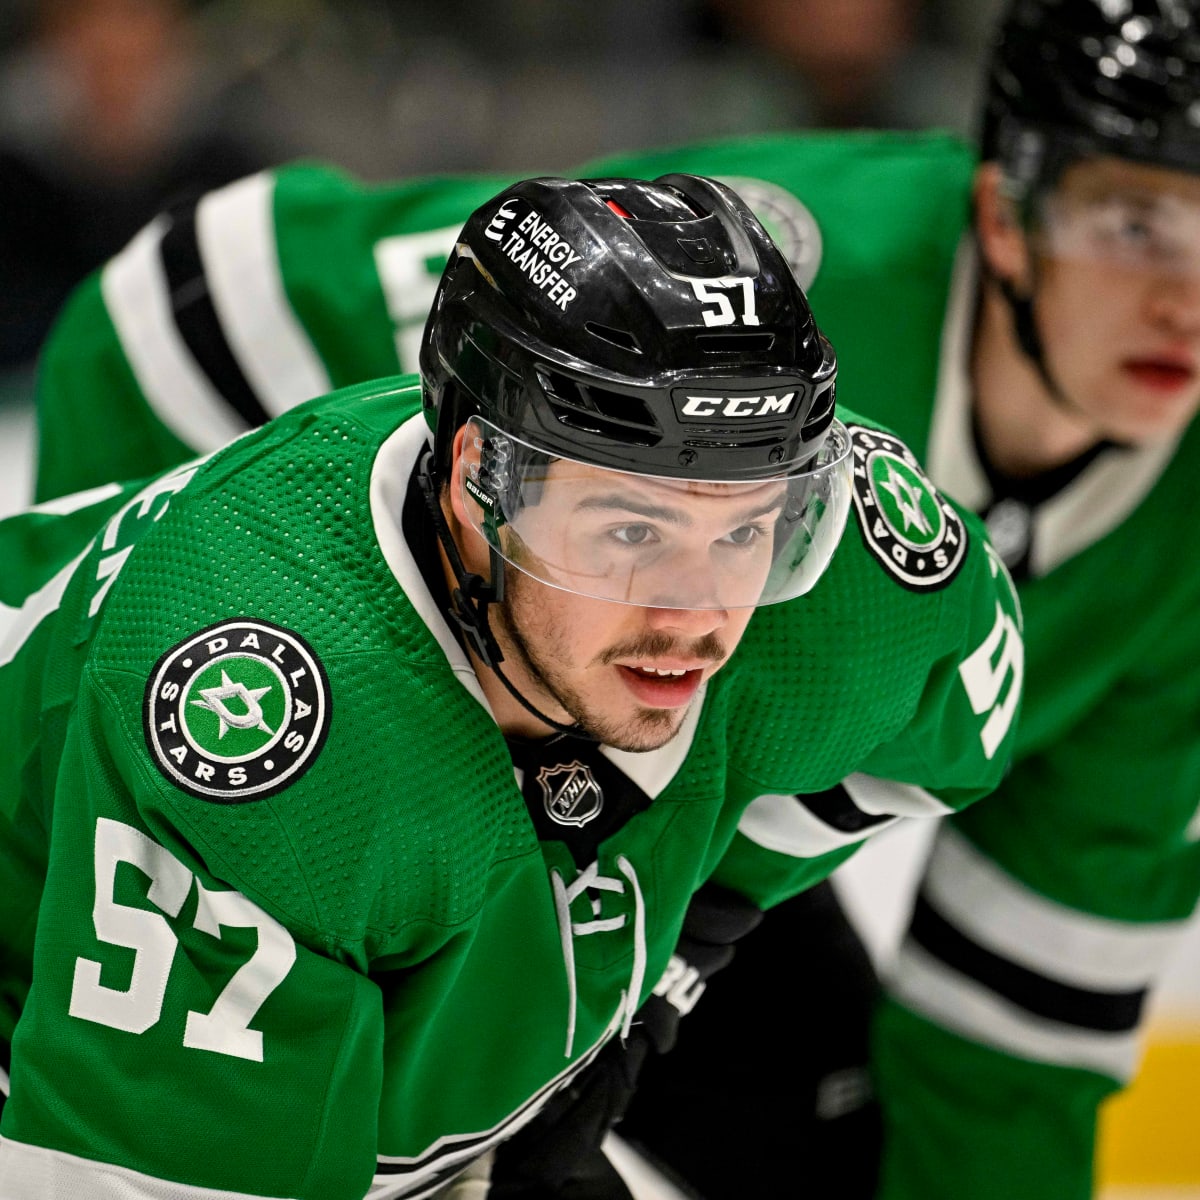 Logan Stankoven, the Stars' Most Exciting Prospect, Is Well on His